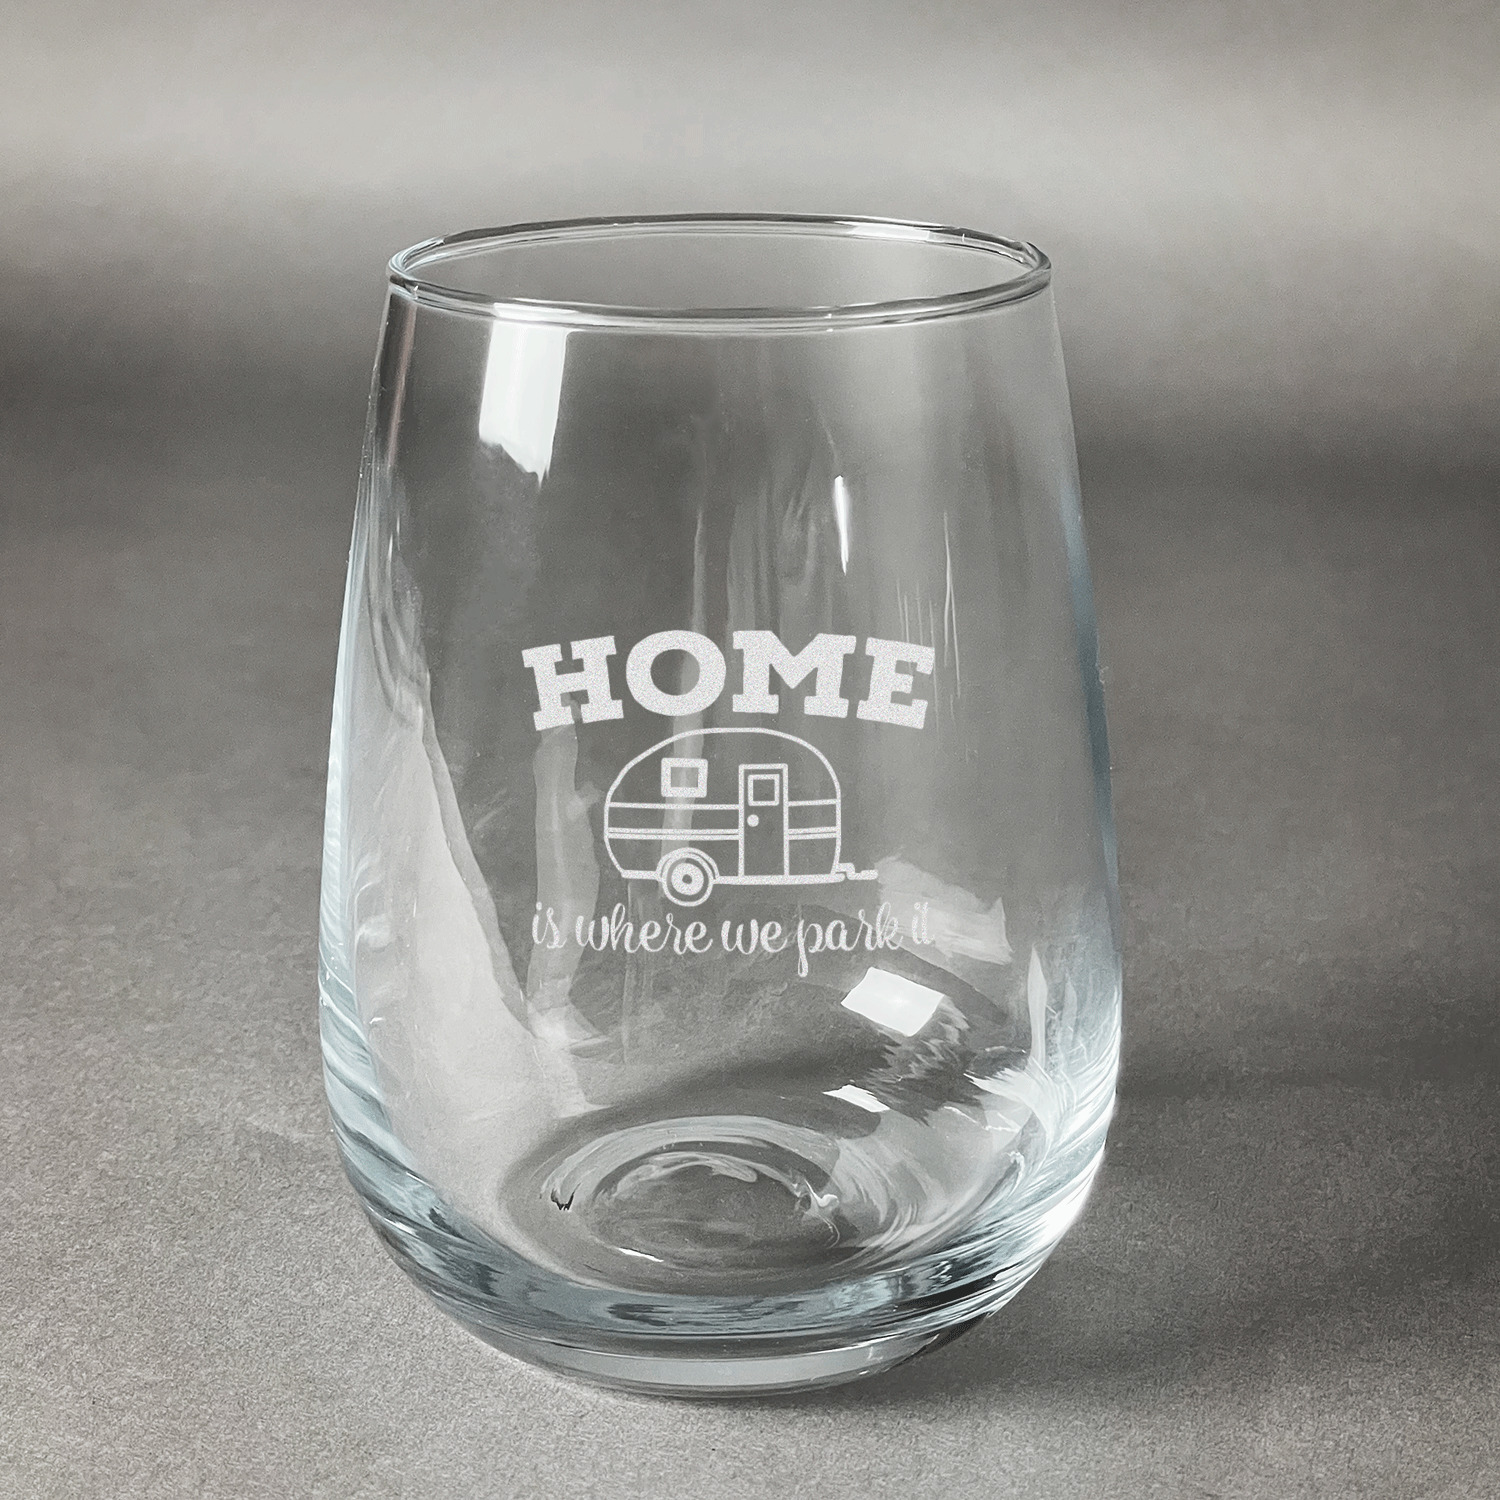 https://www.youcustomizeit.com/common/MAKE/1057238/Summer-Camping-Stemless-Wine-Glass-Front-Approval.jpg?lm=1682544434